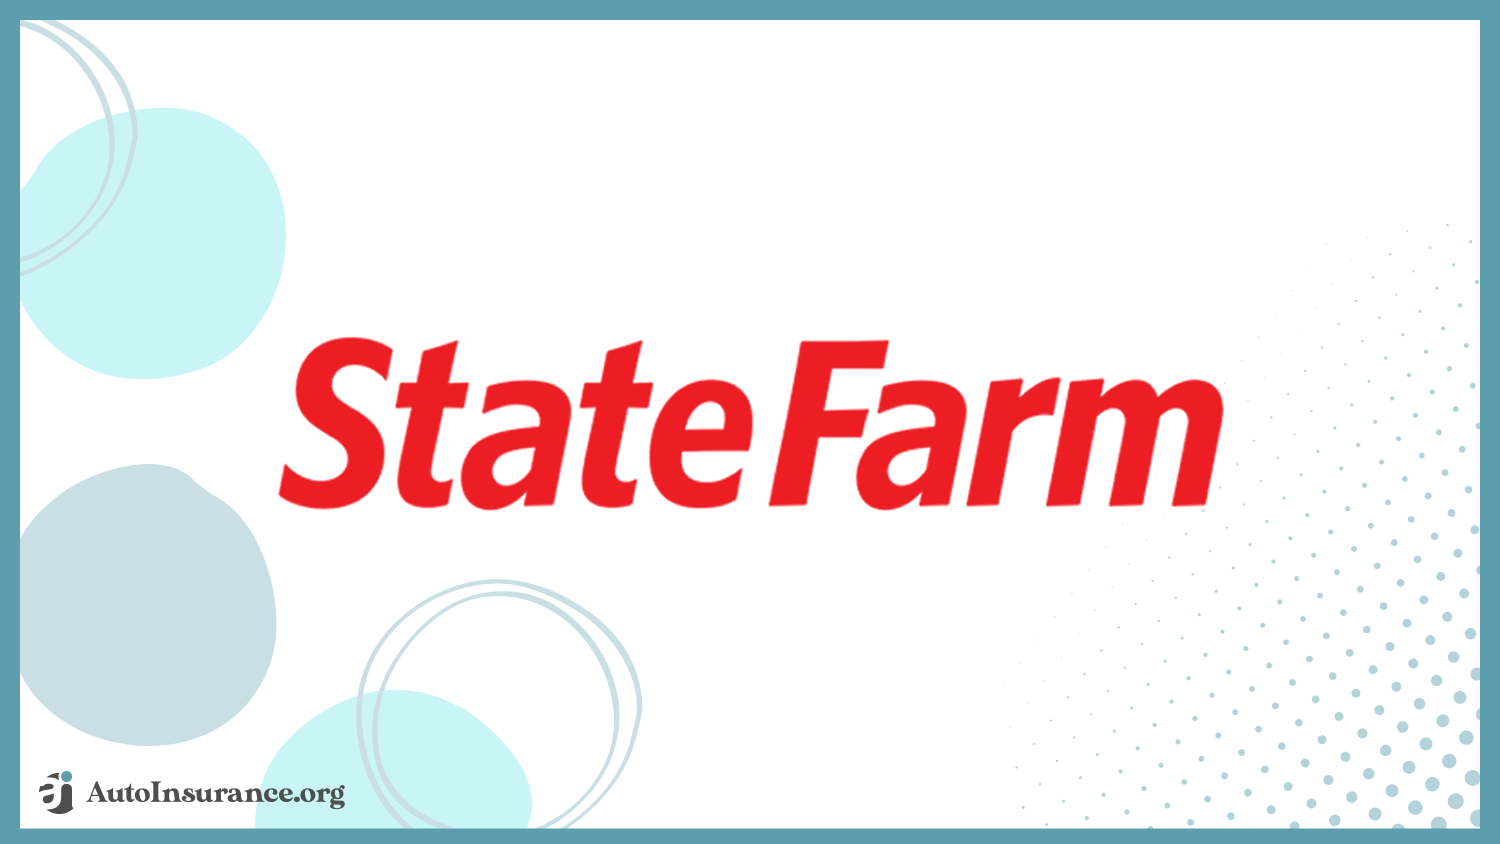 State Farm: cheap auto insurance for union members